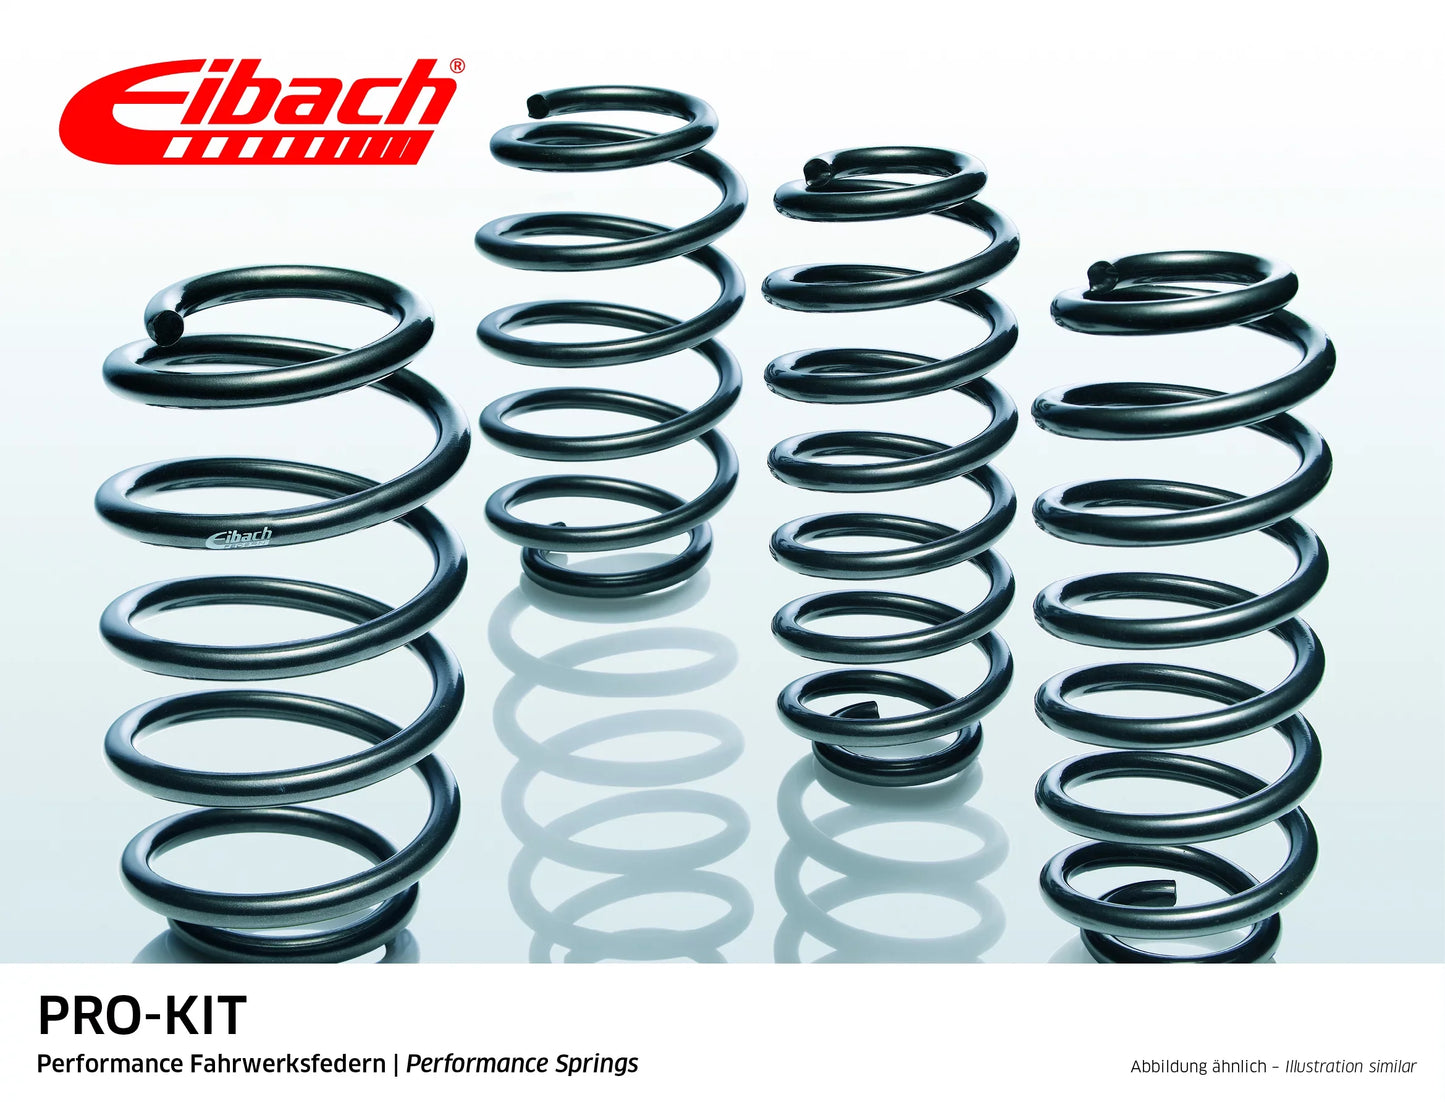 Eibach Pro-Kit Lowering Springs (E10-72-006-01-22) at £428.84